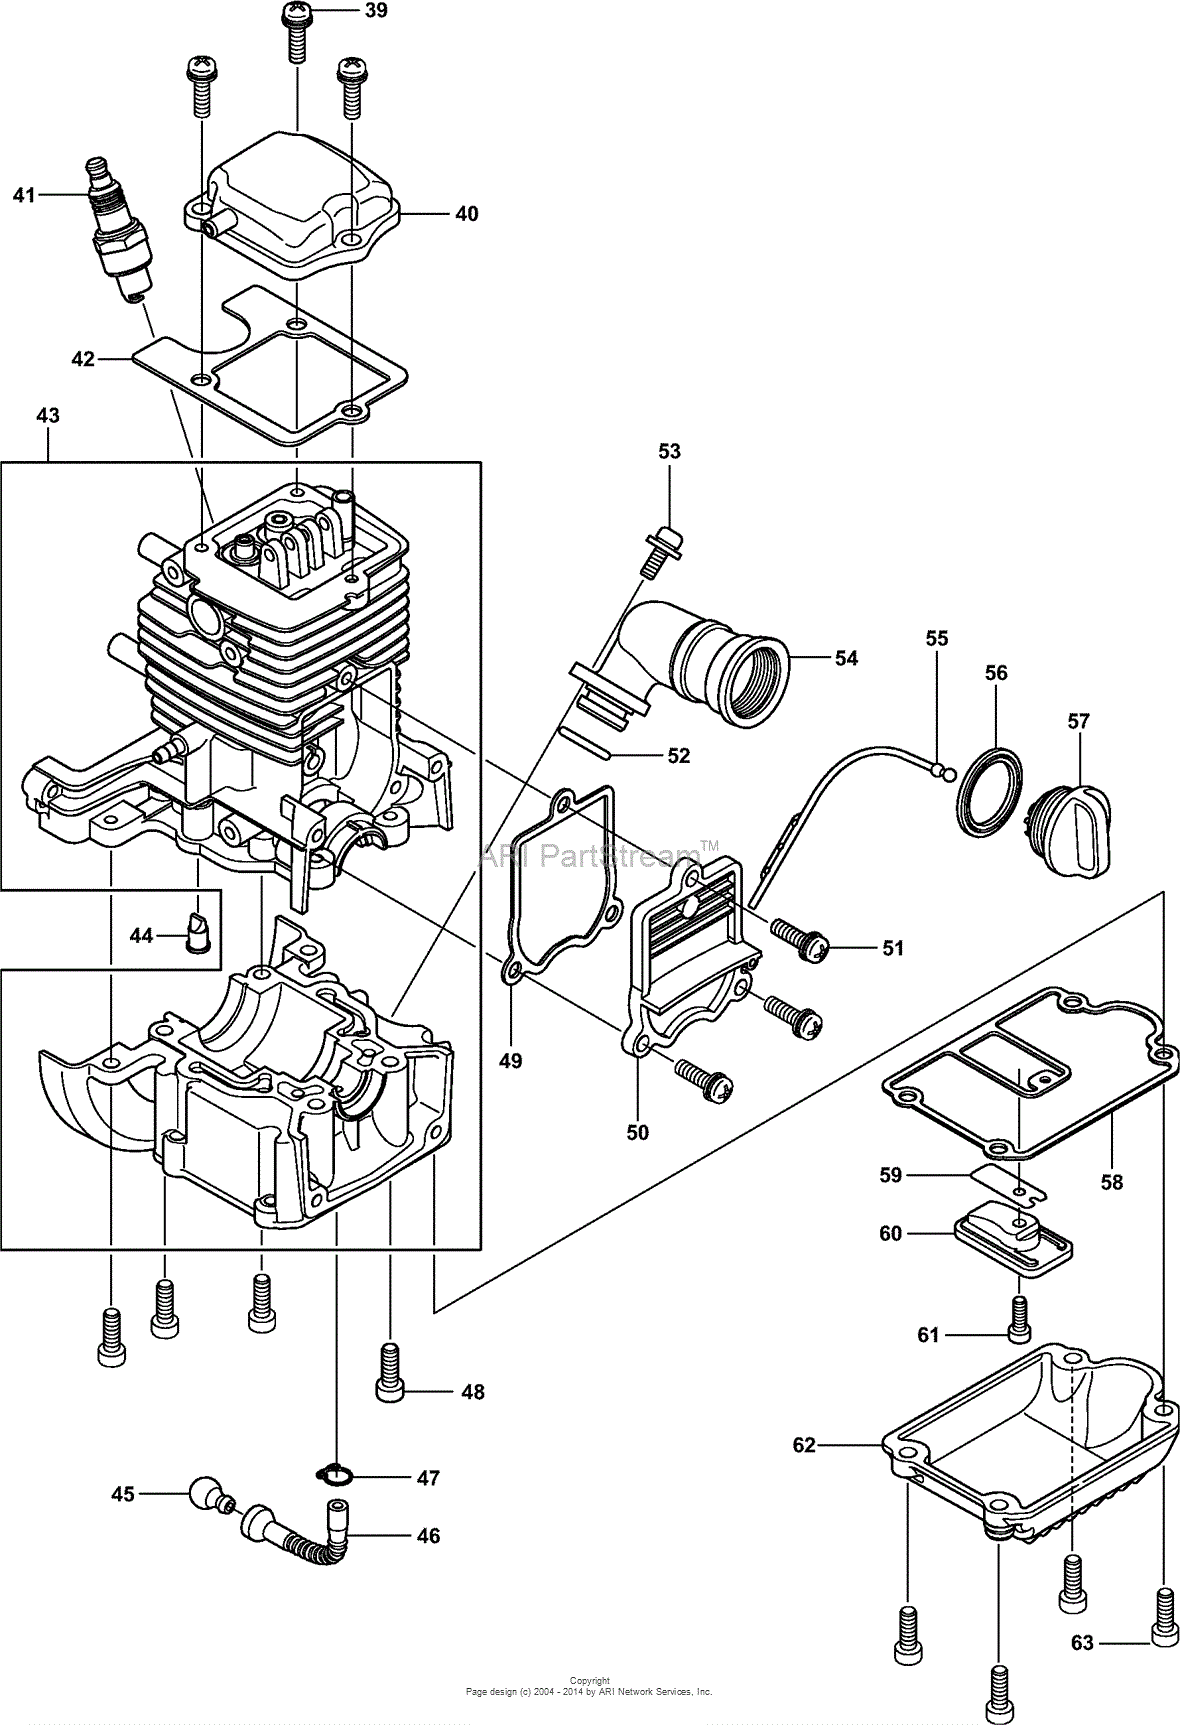 Dolmar PB-250.4 Blowers Parts Diagram for Crankcase, cylinder, oil case